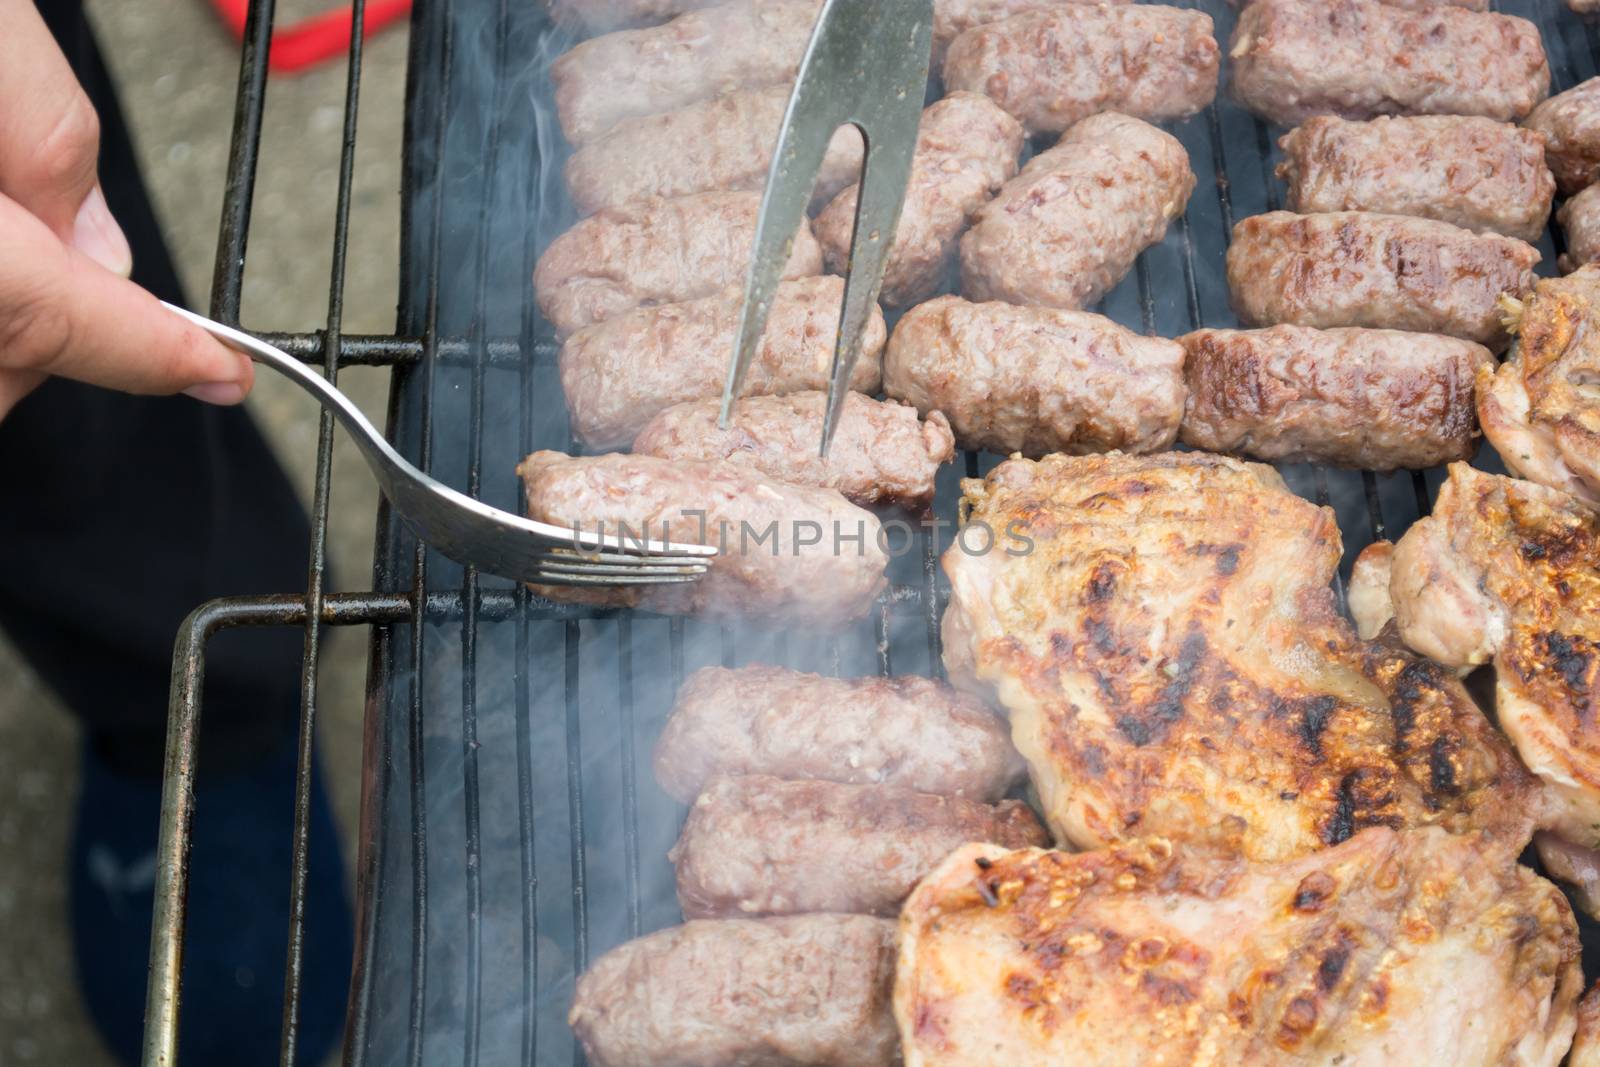 Grilling cevapi and pork chops. Hand visible in the shot